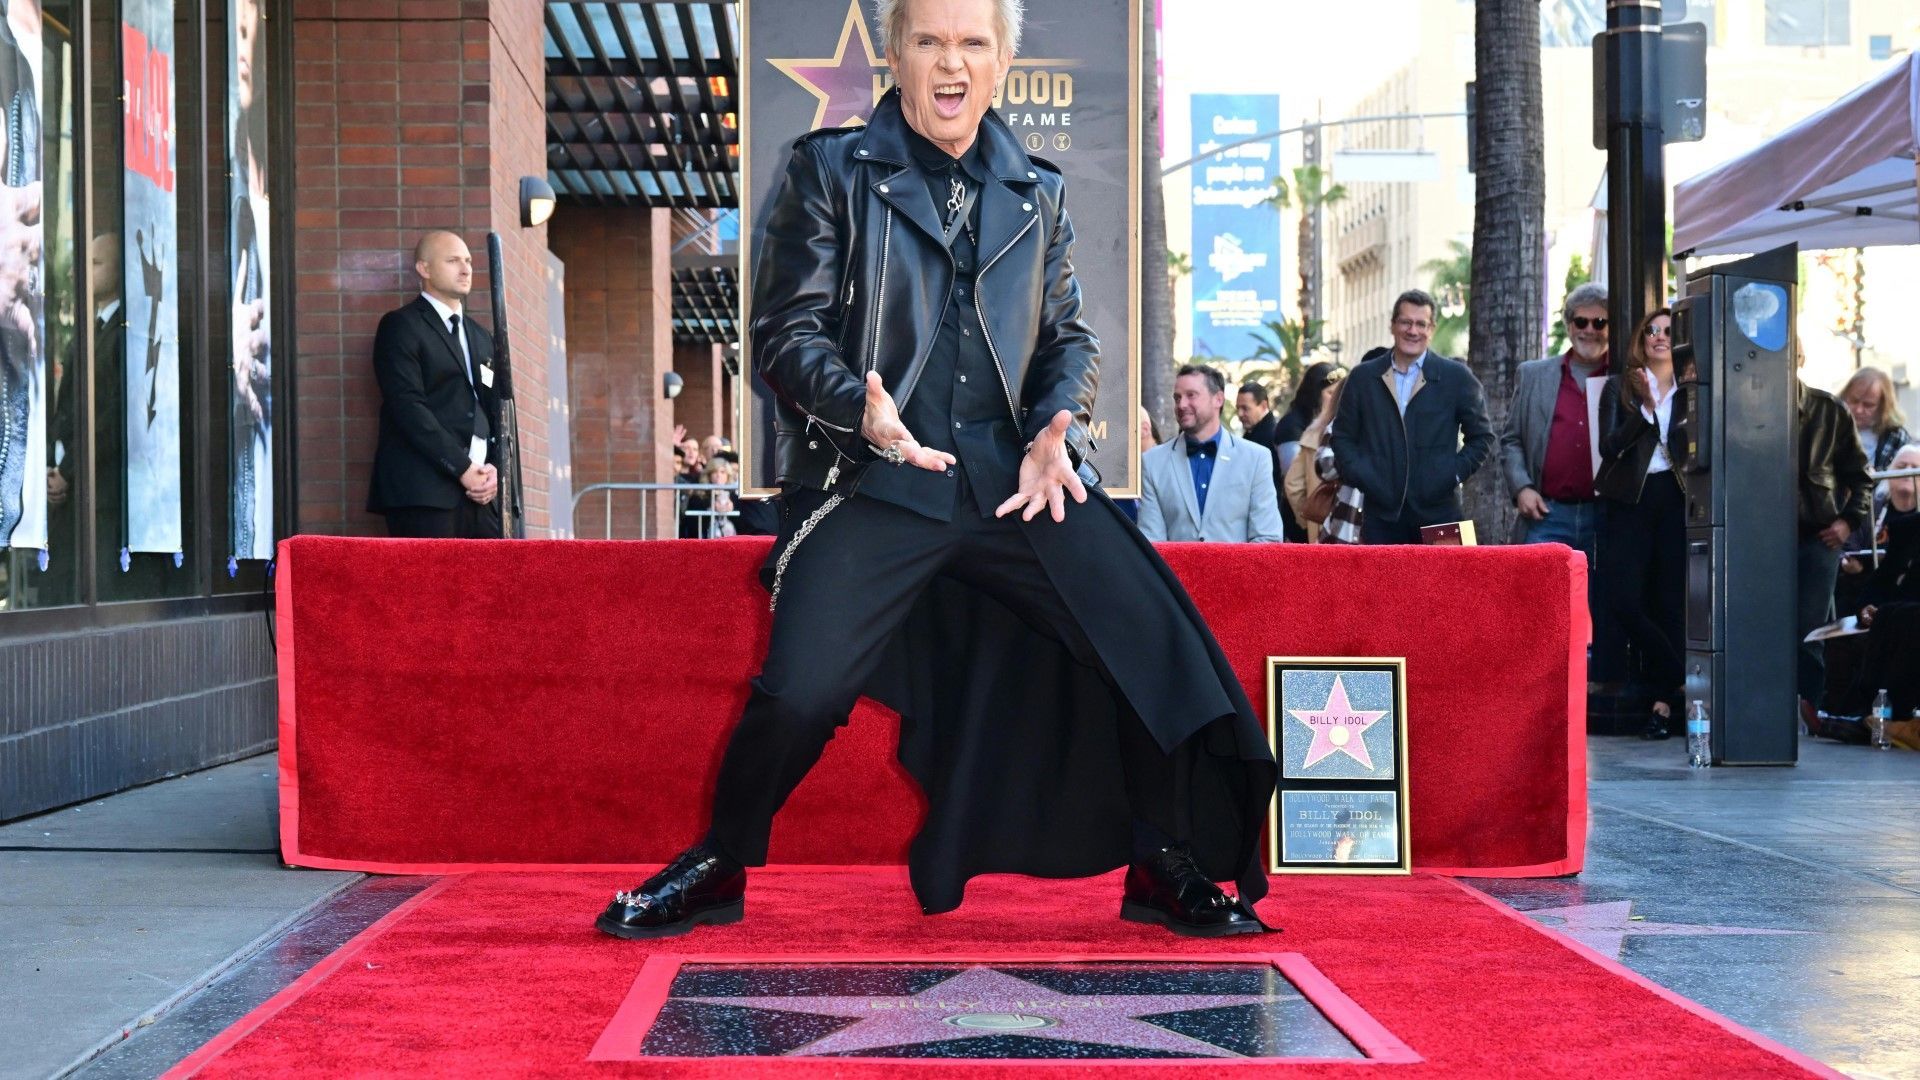 Billy Idol gets star on the Hollywood Walk of Fame